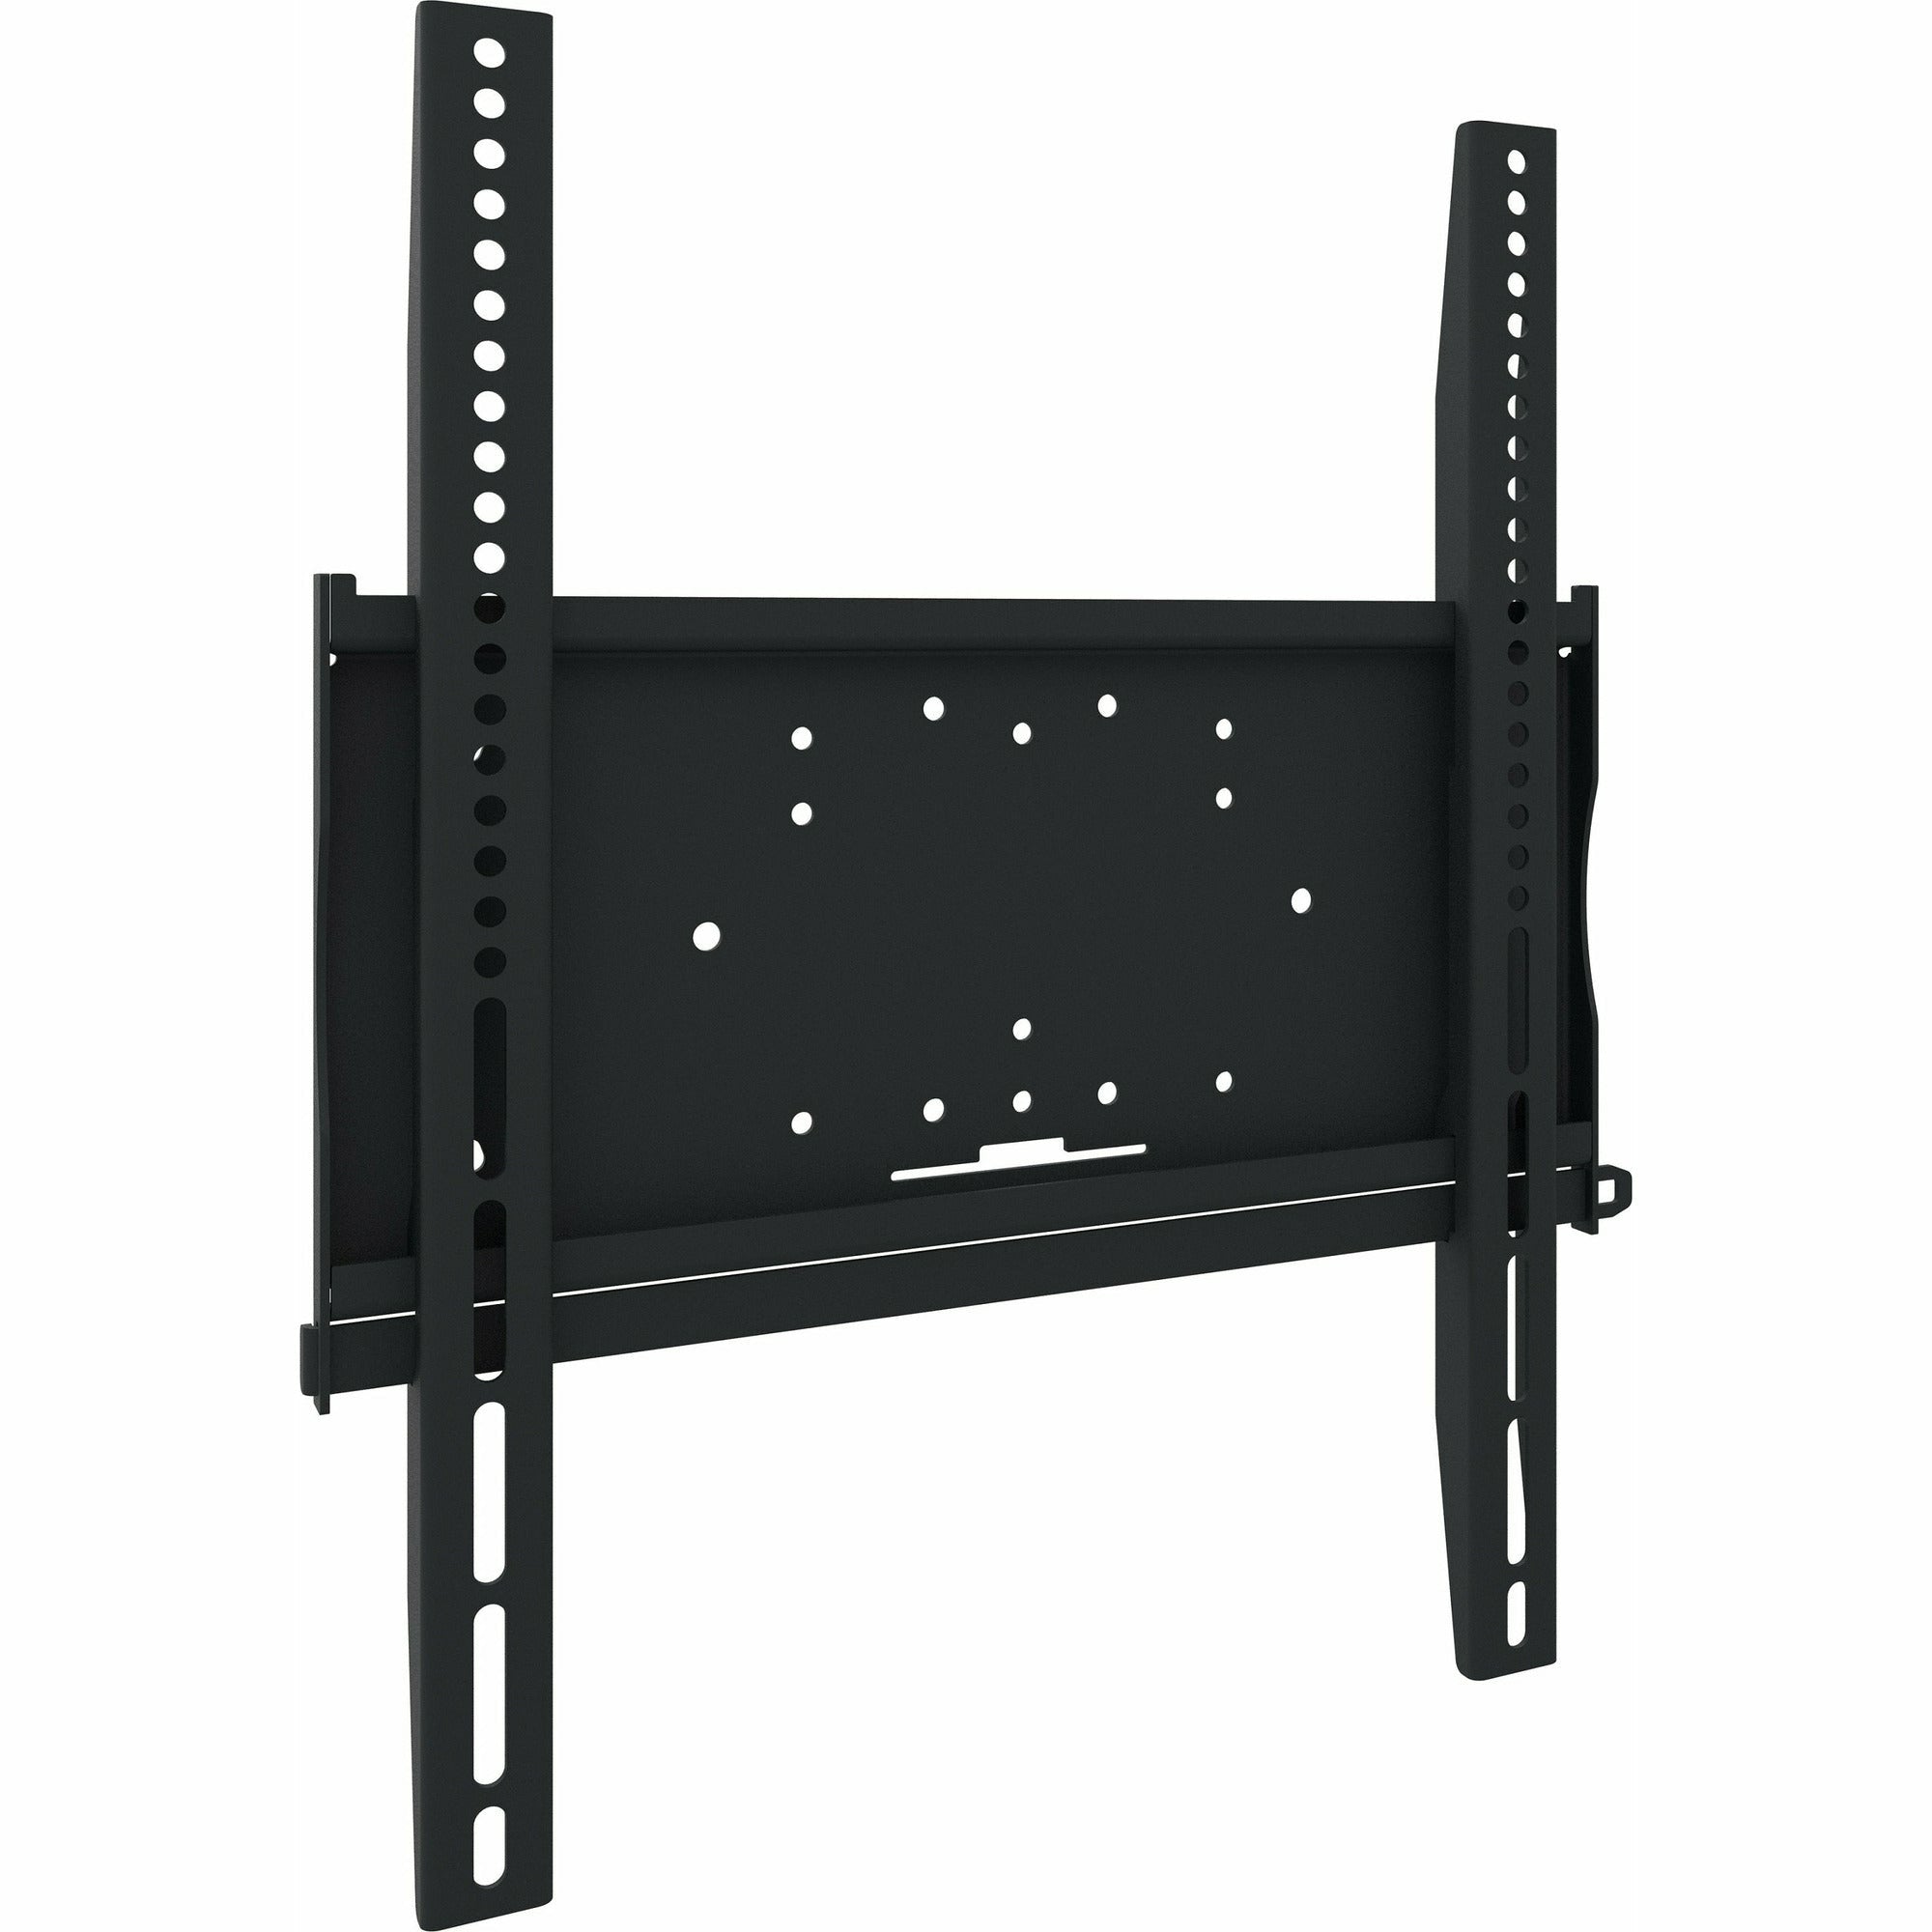 iiyama Universal Wall Mount, Max. Load 125 kg, 436 x 600 mm (particularly suitable for mounting the large displays in portrait mode)